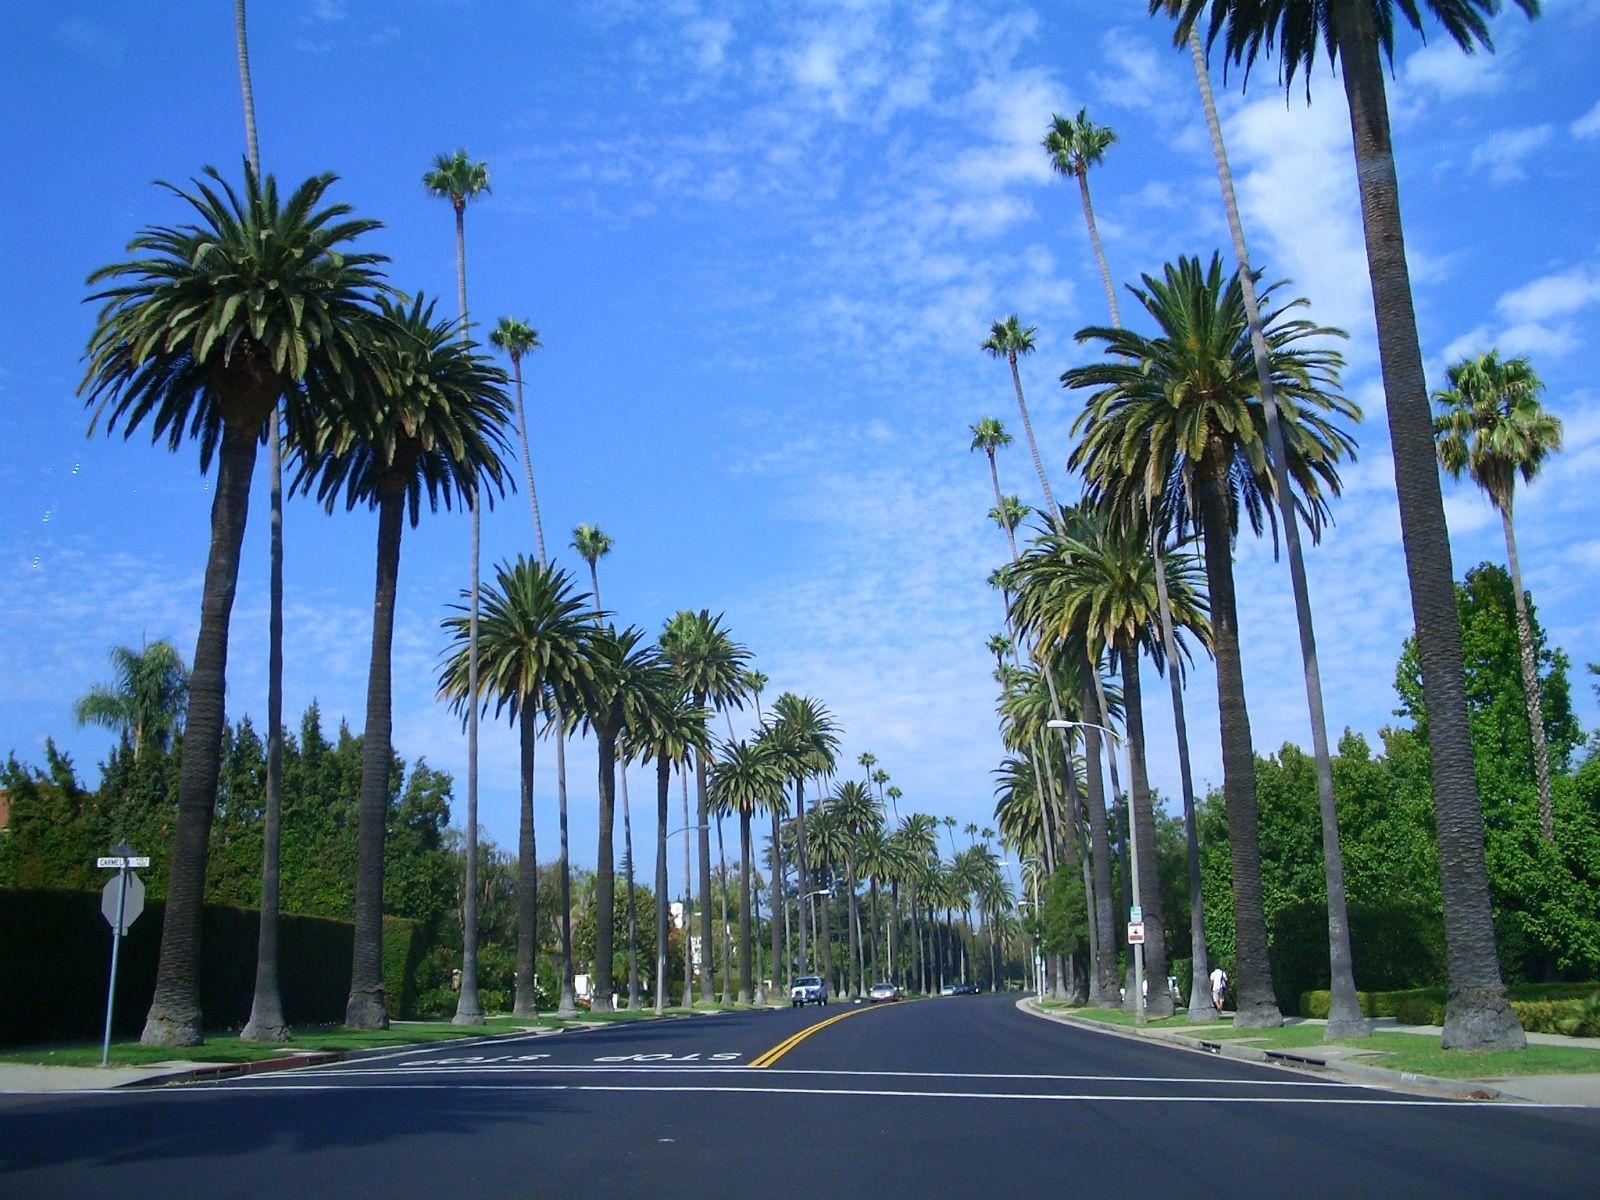 Beverly Hills Wallpapers Top Free Beverly Hills Backgrounds Wallpaperaccess